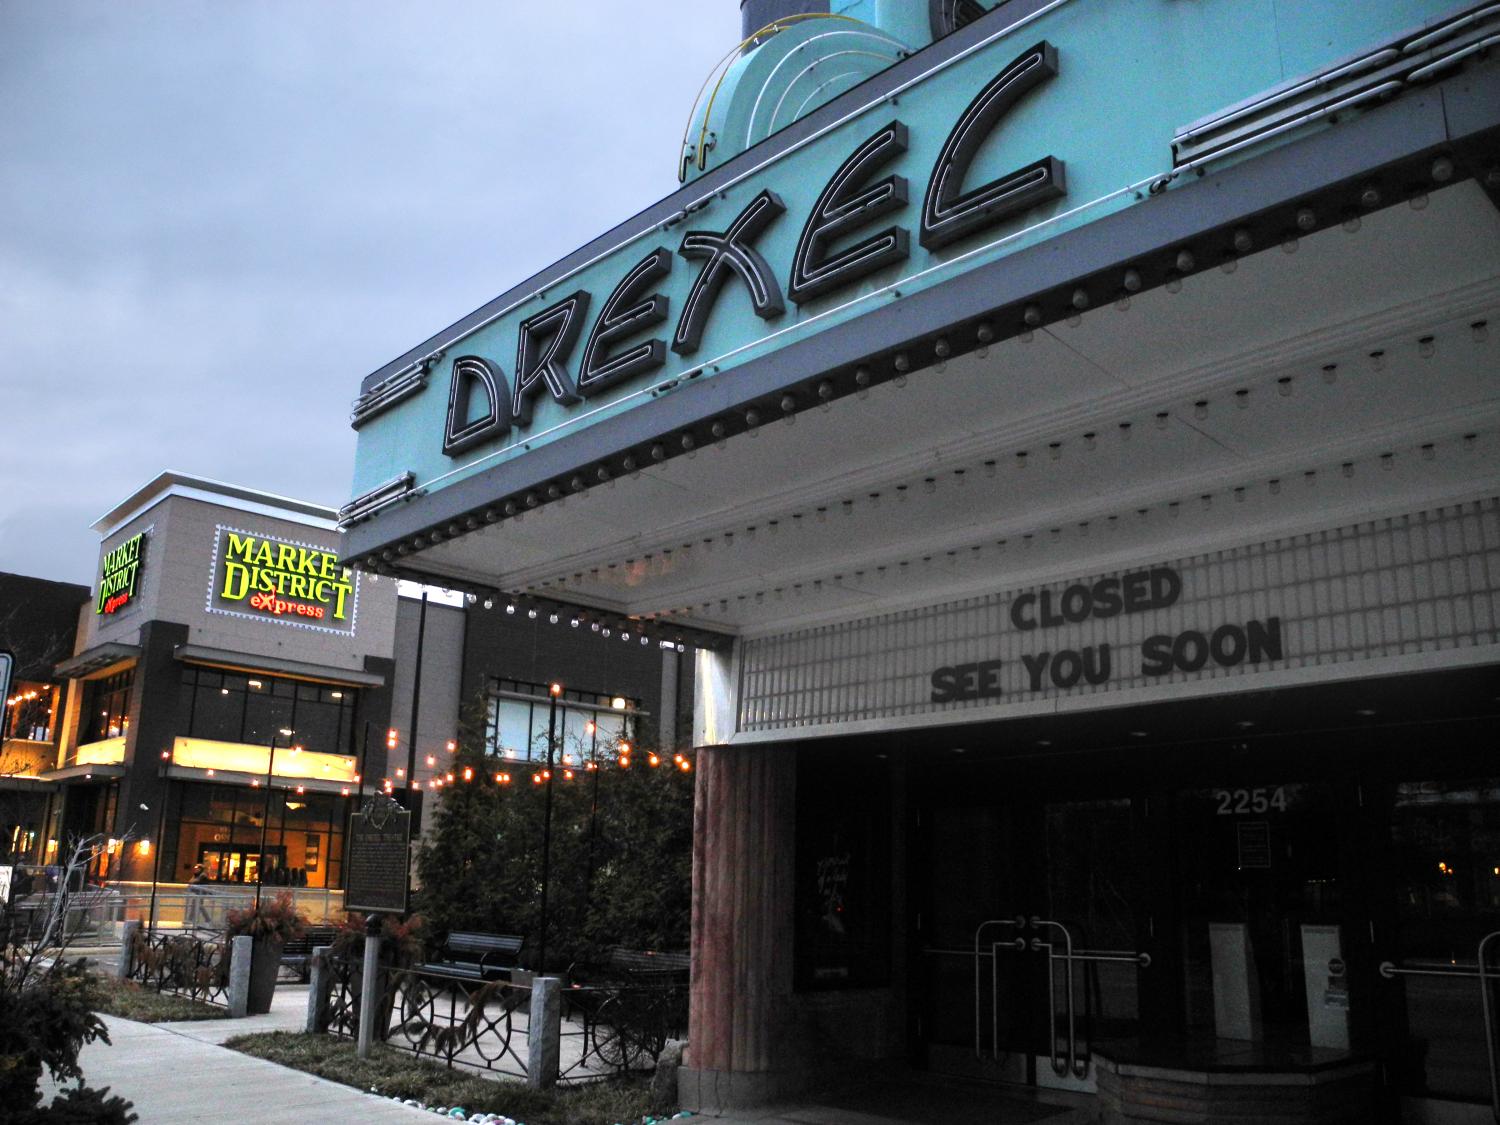 Photo of Drexel Theater with Marquee Reading "Closed, See You Soon"